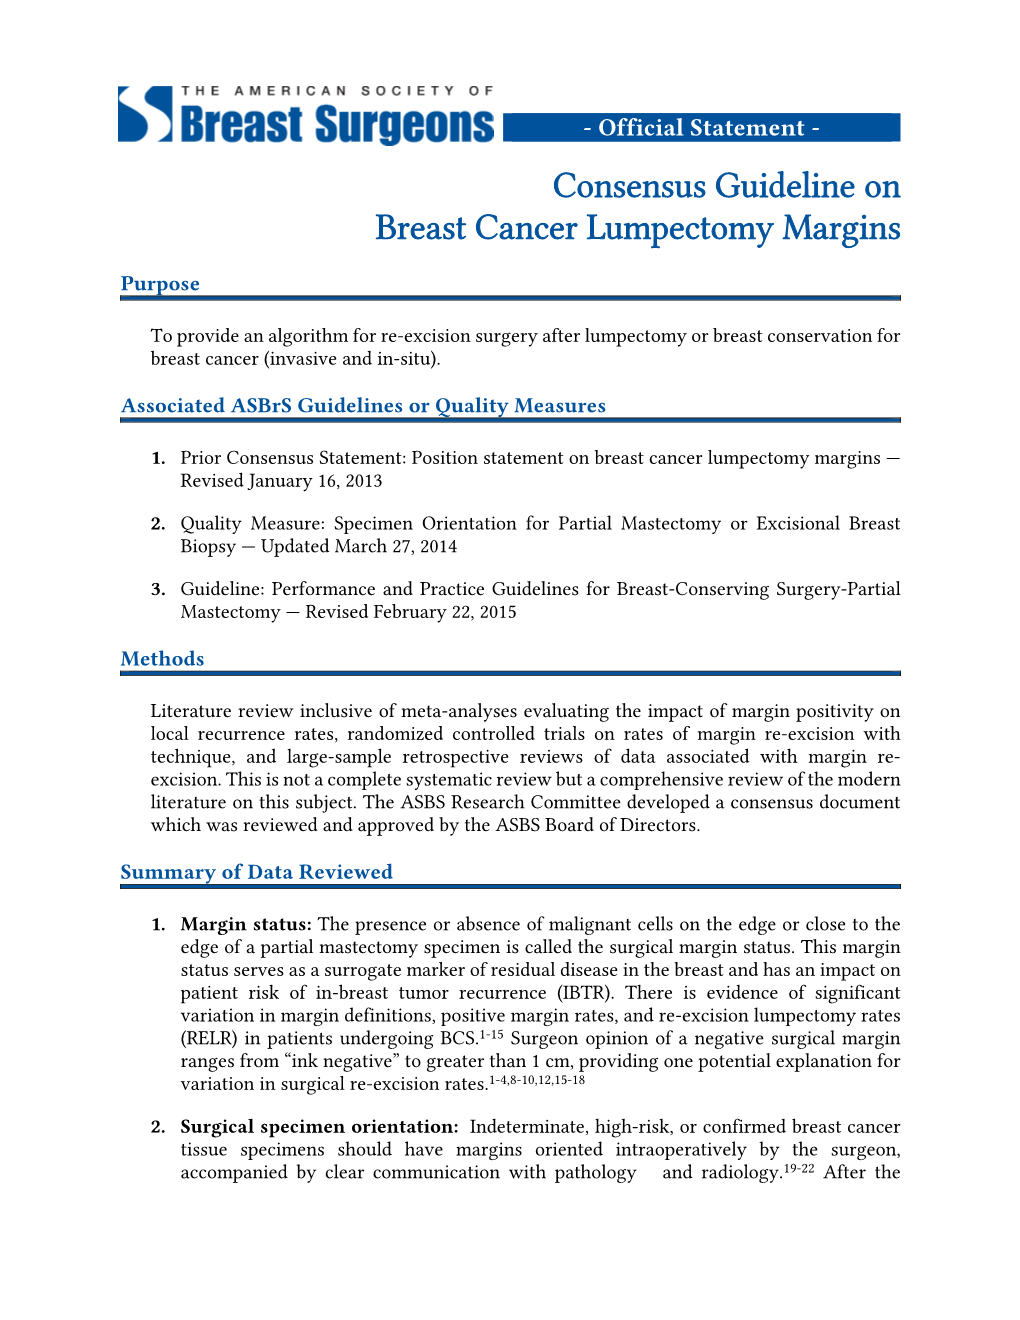 Consensus Guideline on Breast Cancer Lumpectomy Margins